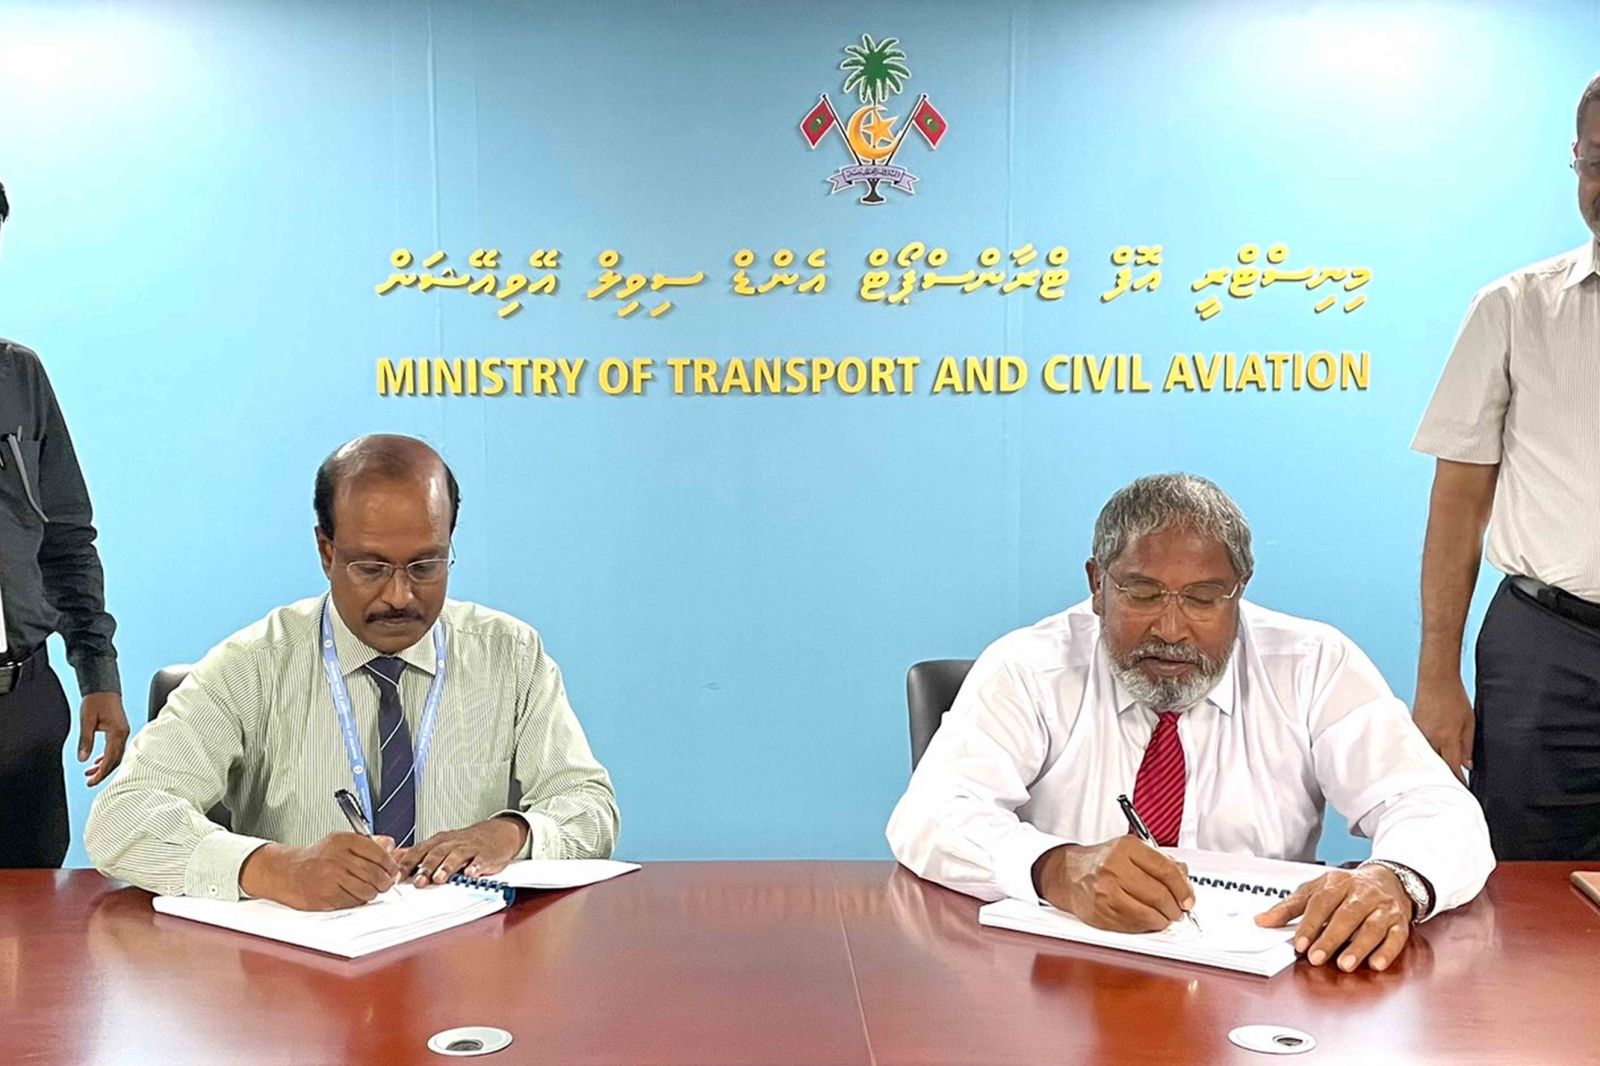 Kaadedhdhoo Airport Signed Over to Villa Air